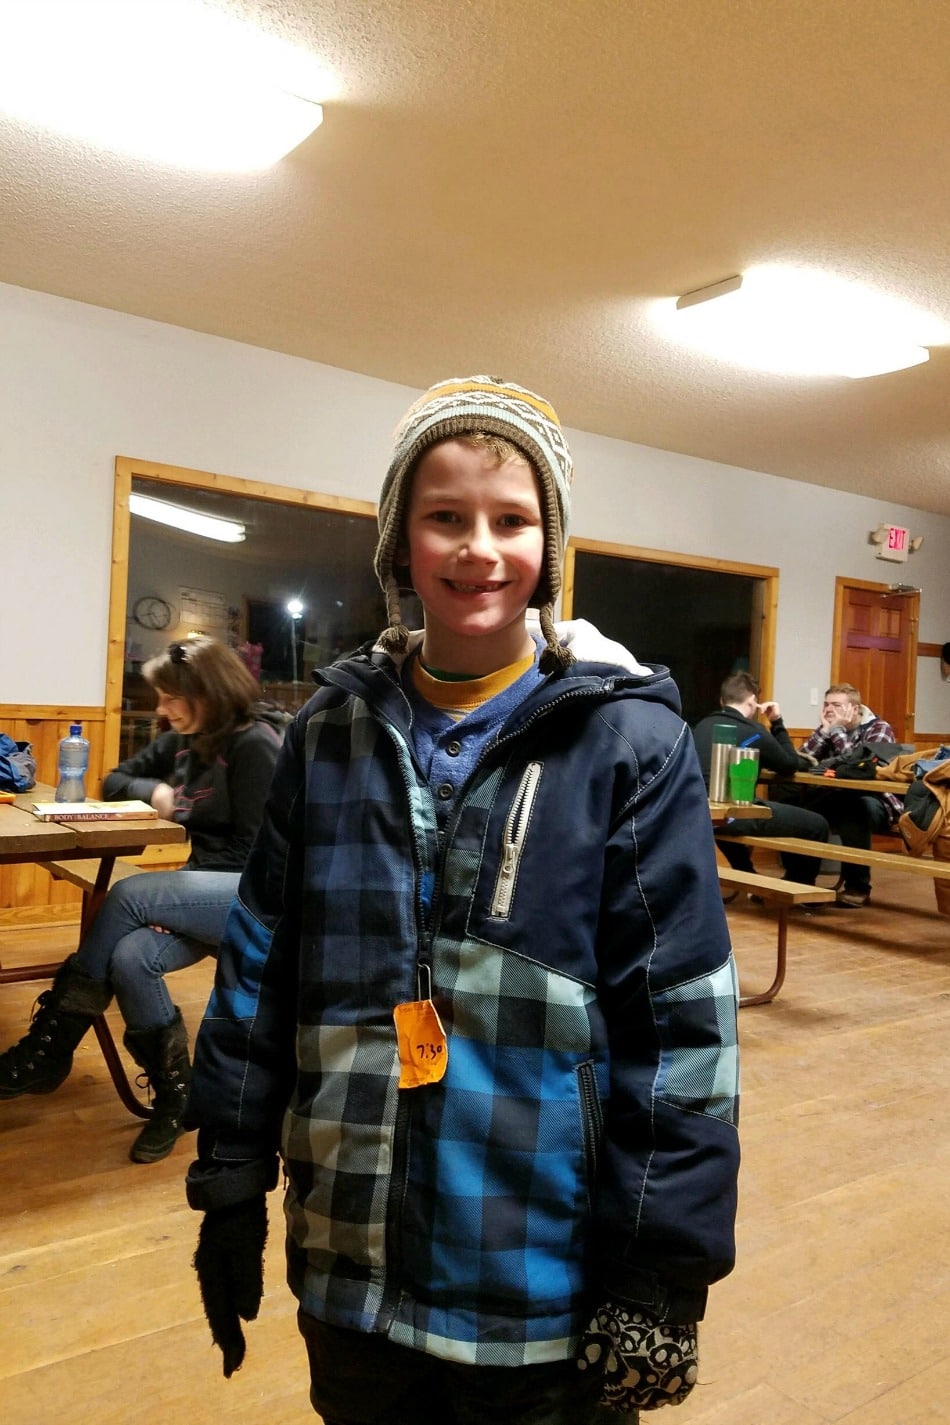 Snow Tubing & Connecting With Others | Growing Up Herbal | We recently took a trip to Jonas Ridge Snow Tubing Park to have some fun and connect with others OUTSIDE of the Internet. Read all about it!